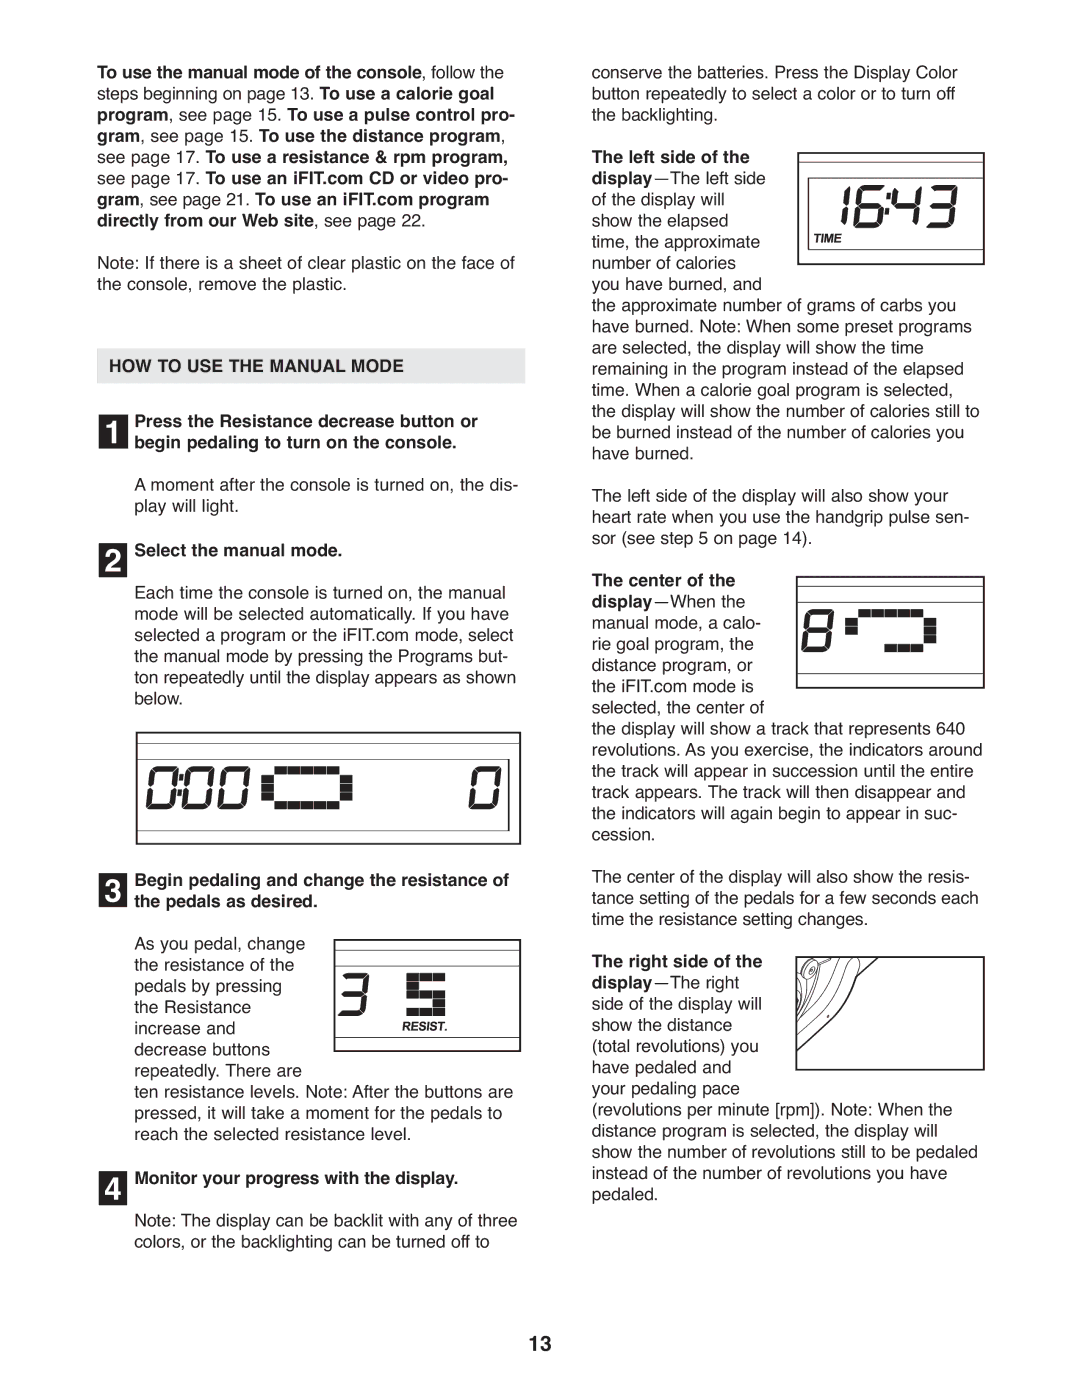 ProForm 831.28544.2 user manual HOW to USE the Manual Mode, Monitor your progress with the display 